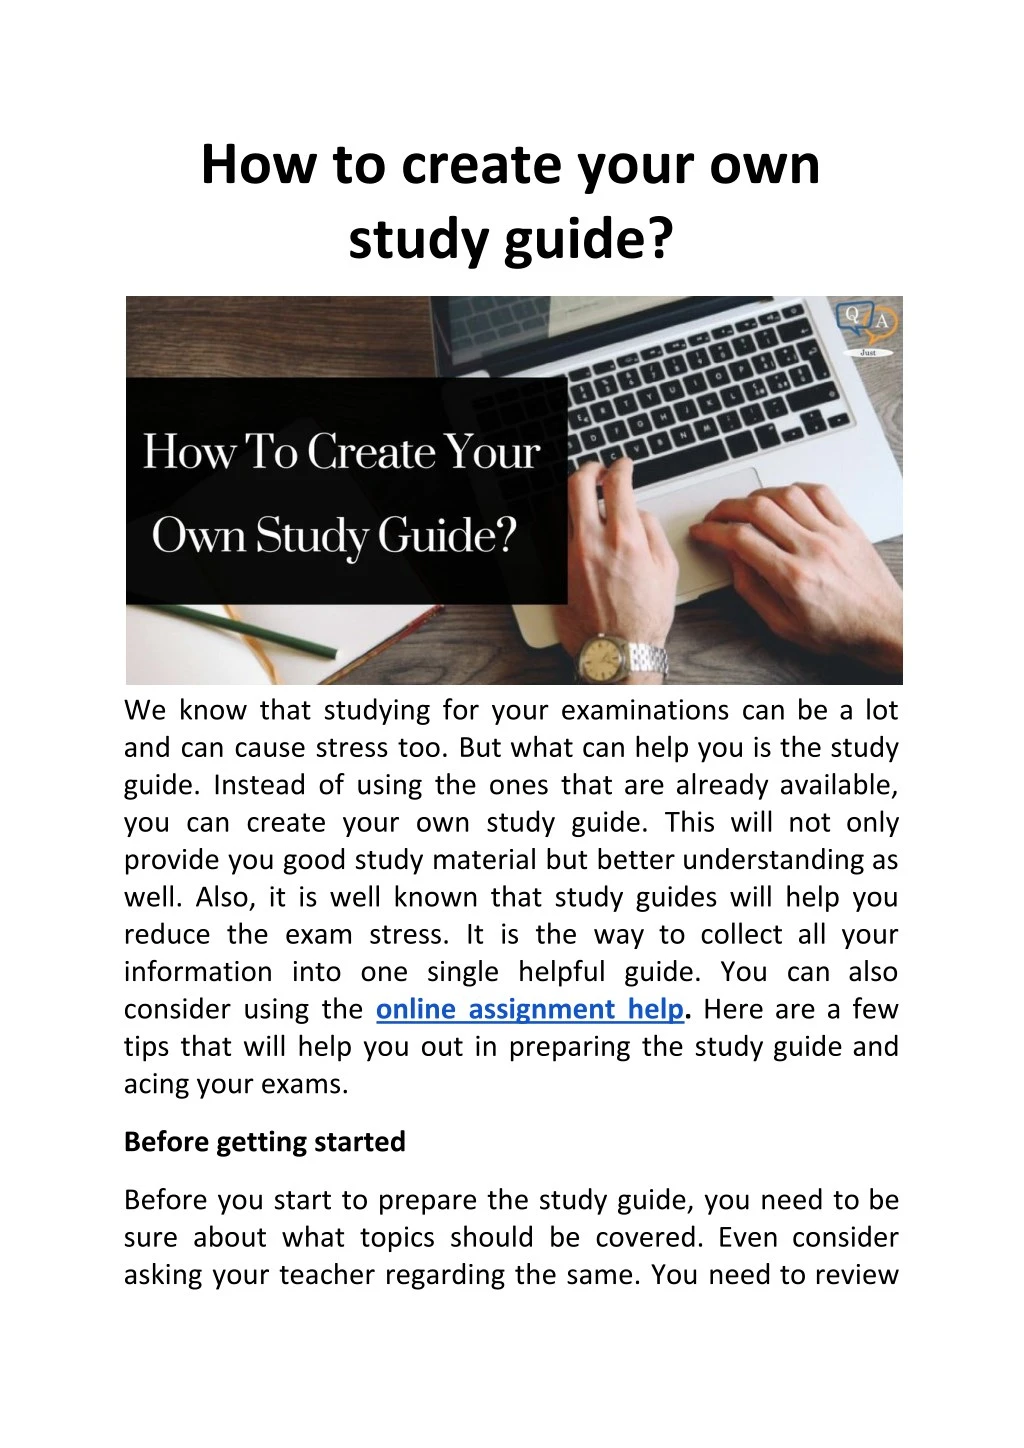 how to create your own study guide